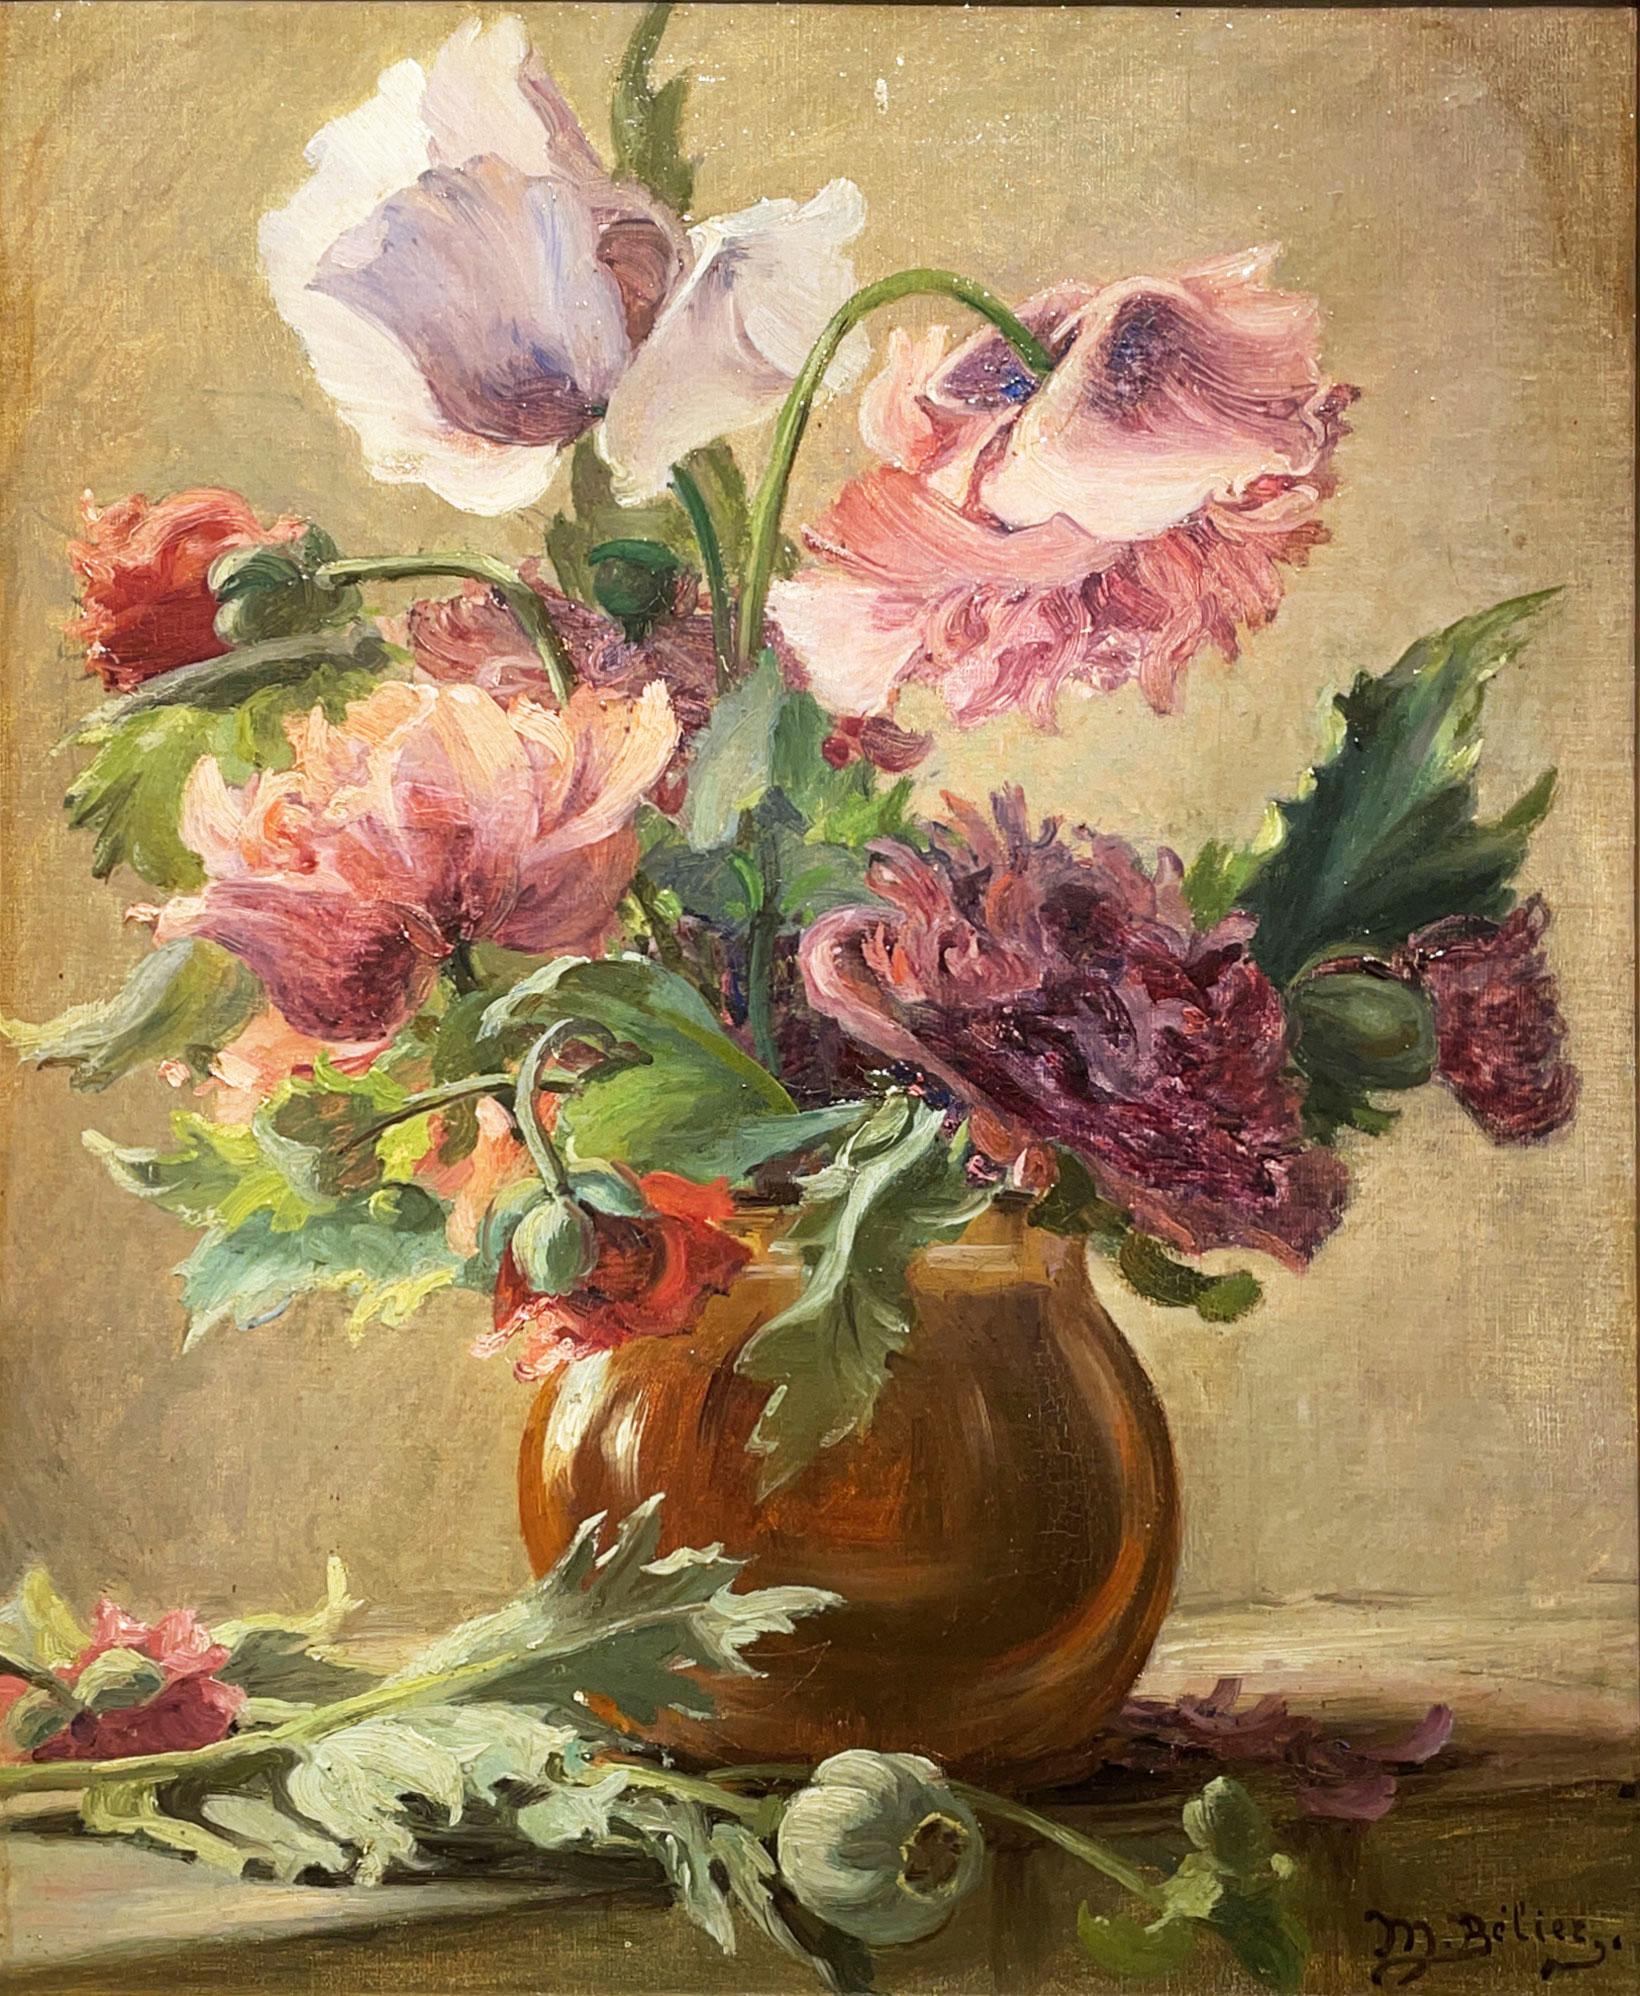 Vase with poppies - M.Belier

Oil painting on canvas
Dimensions: 50cm x 40cm dimensions referring to the canvas only
 60cm x 52cm frame included

France in the 1920s

Antique painting from the early twentieth century, depicting poppies in